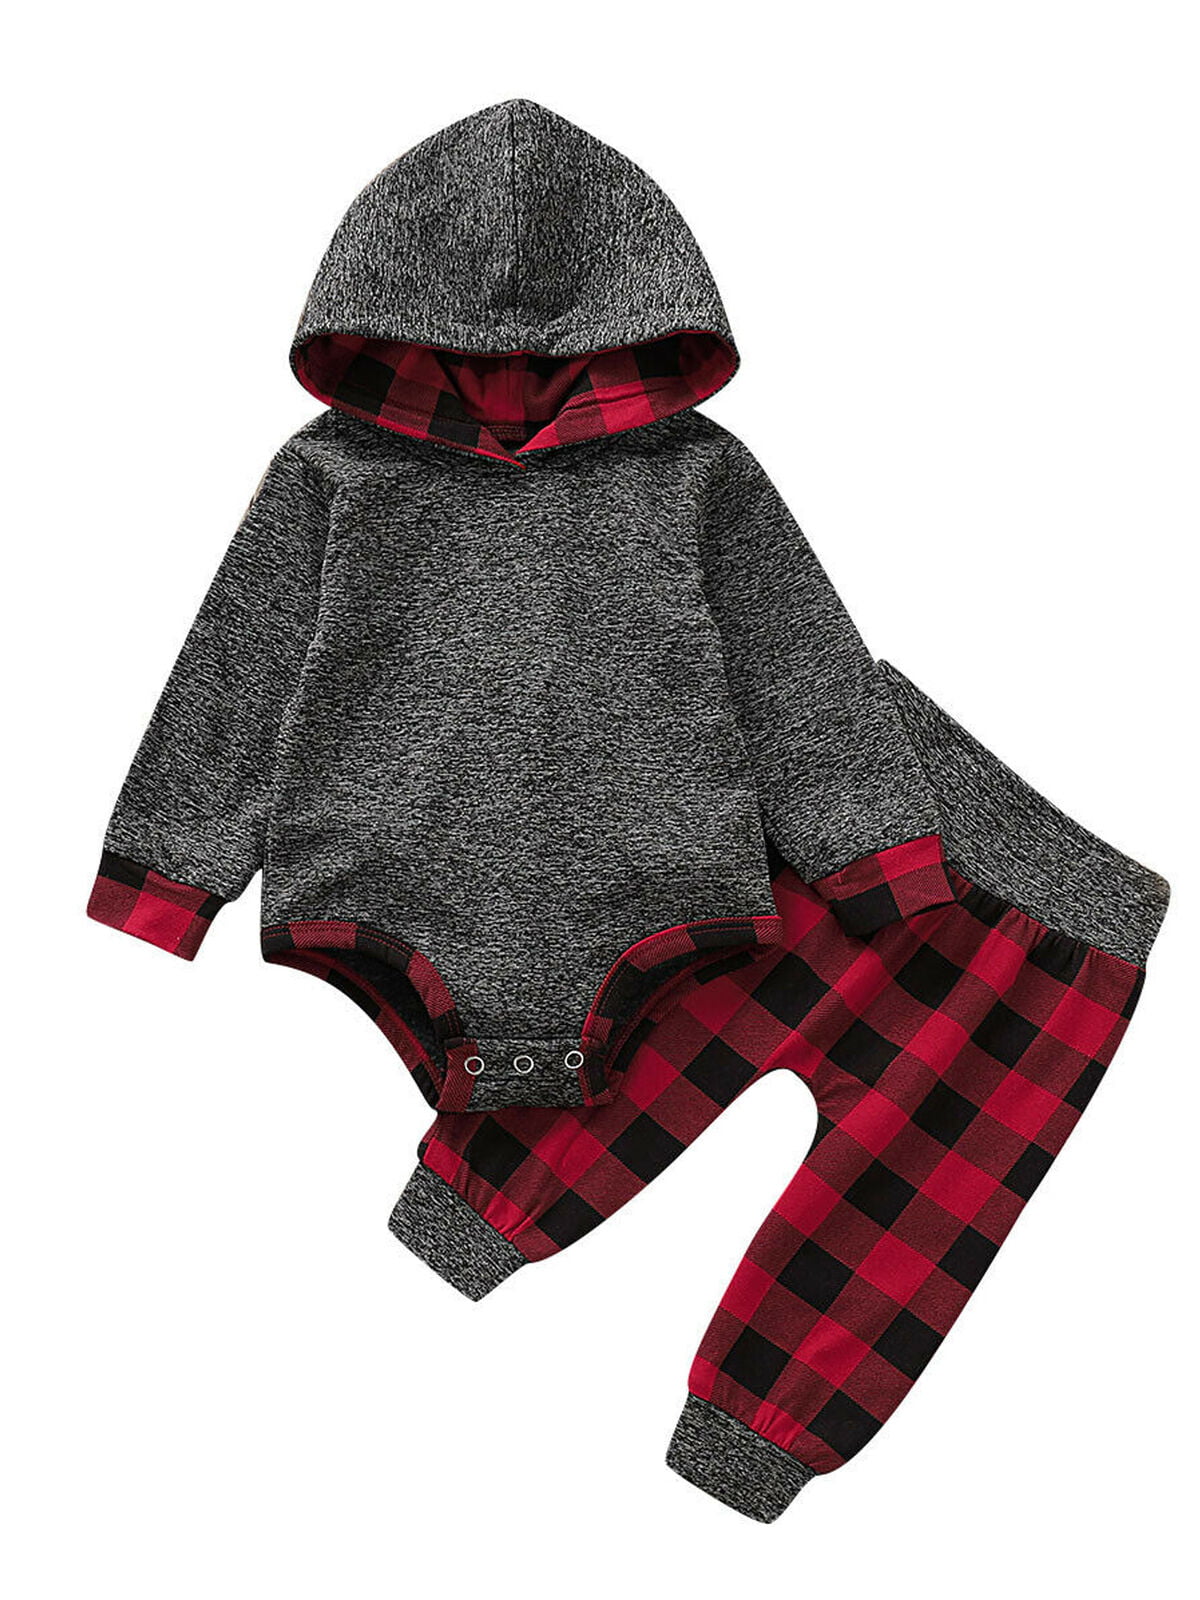 Details about   2020 Clothes autumn and winter suit men and women baby 6 months cotton winter